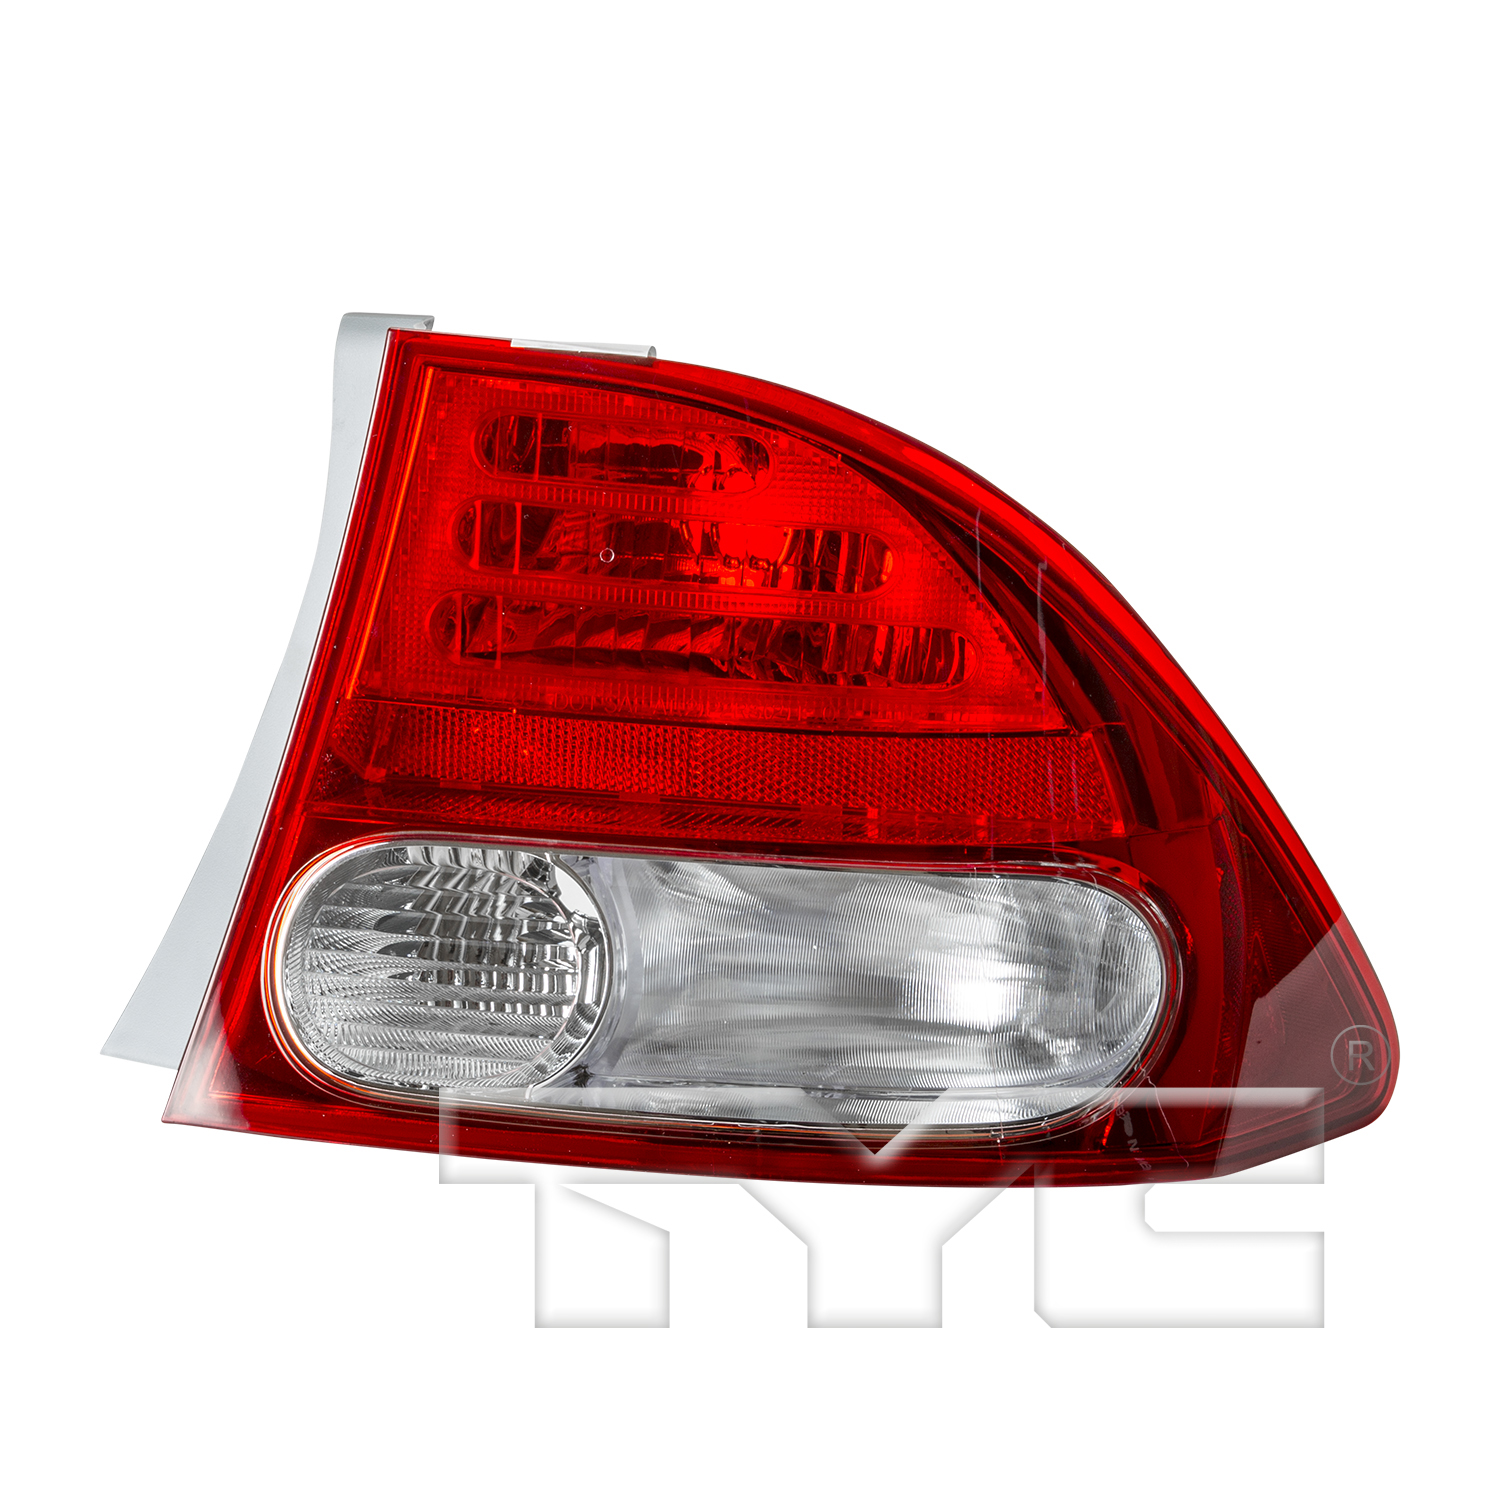 Aftermarket TAILLIGHTS for HONDA - CIVIC, CIVIC,09-11,RT Taillamp lens/housing